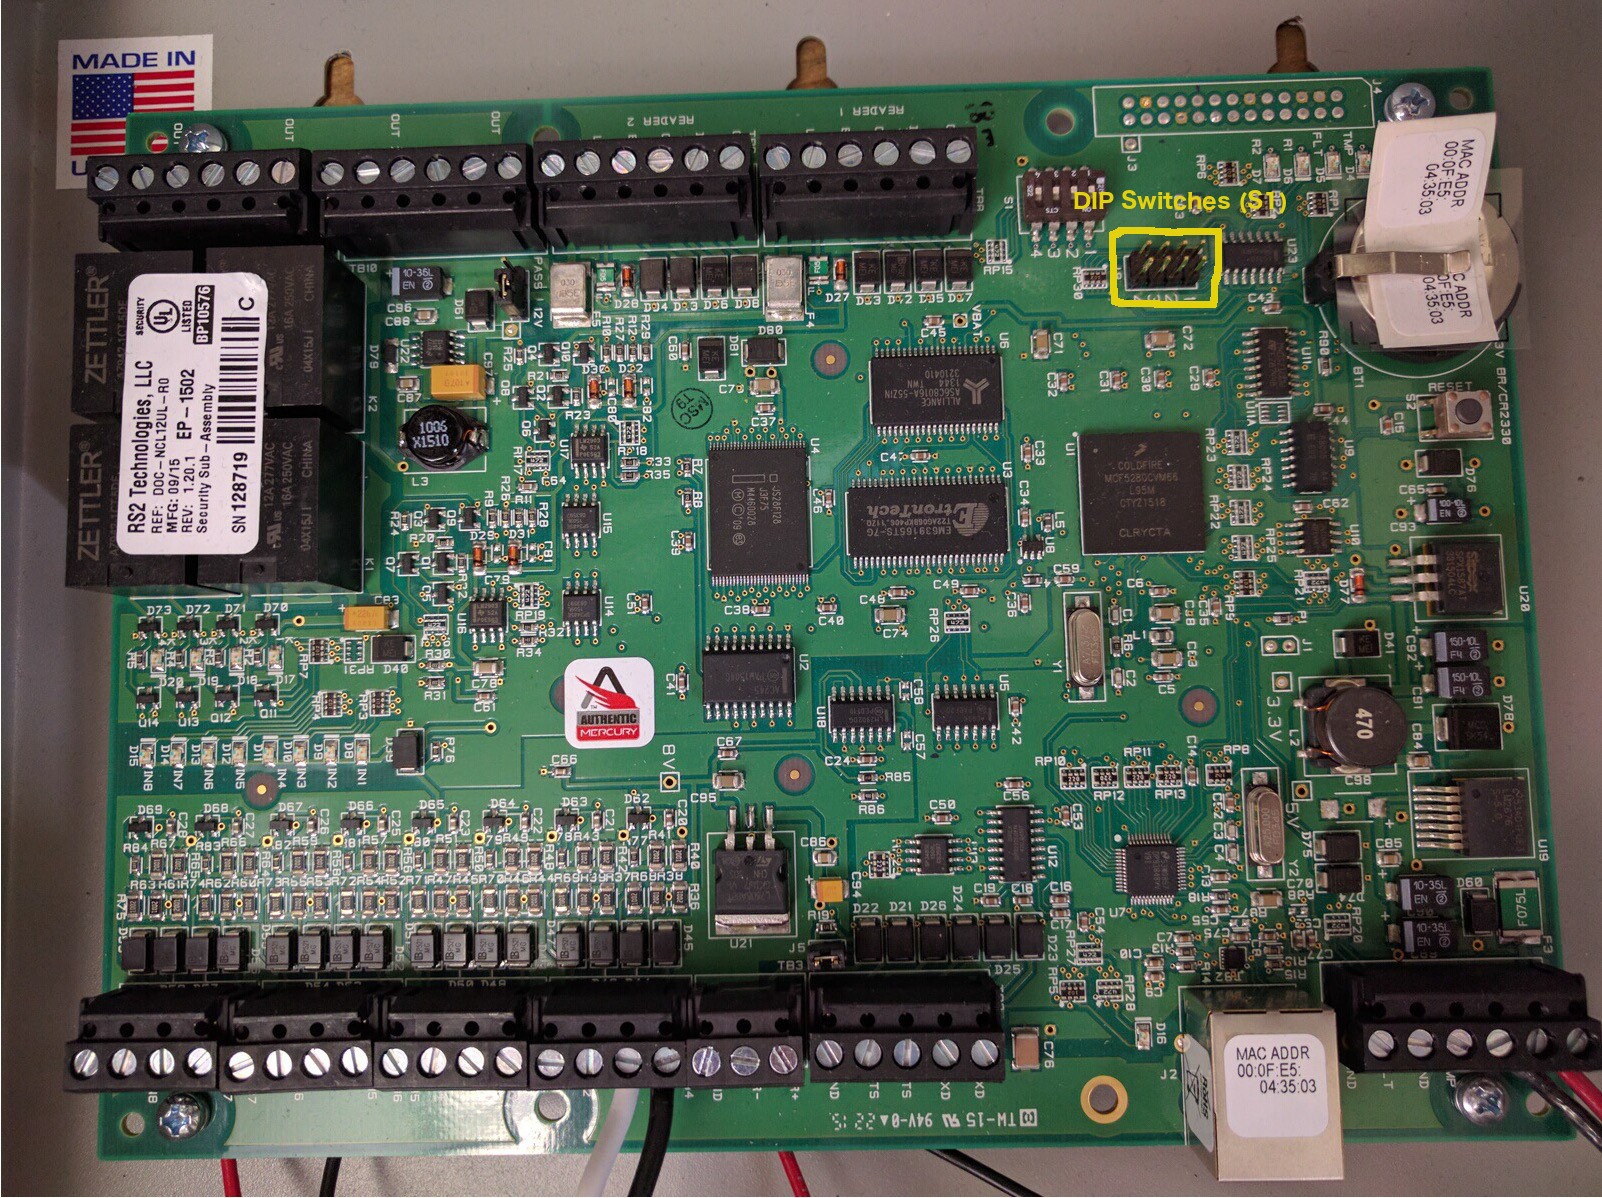 This image demonstrates the EP-1502 Door Controller Board.